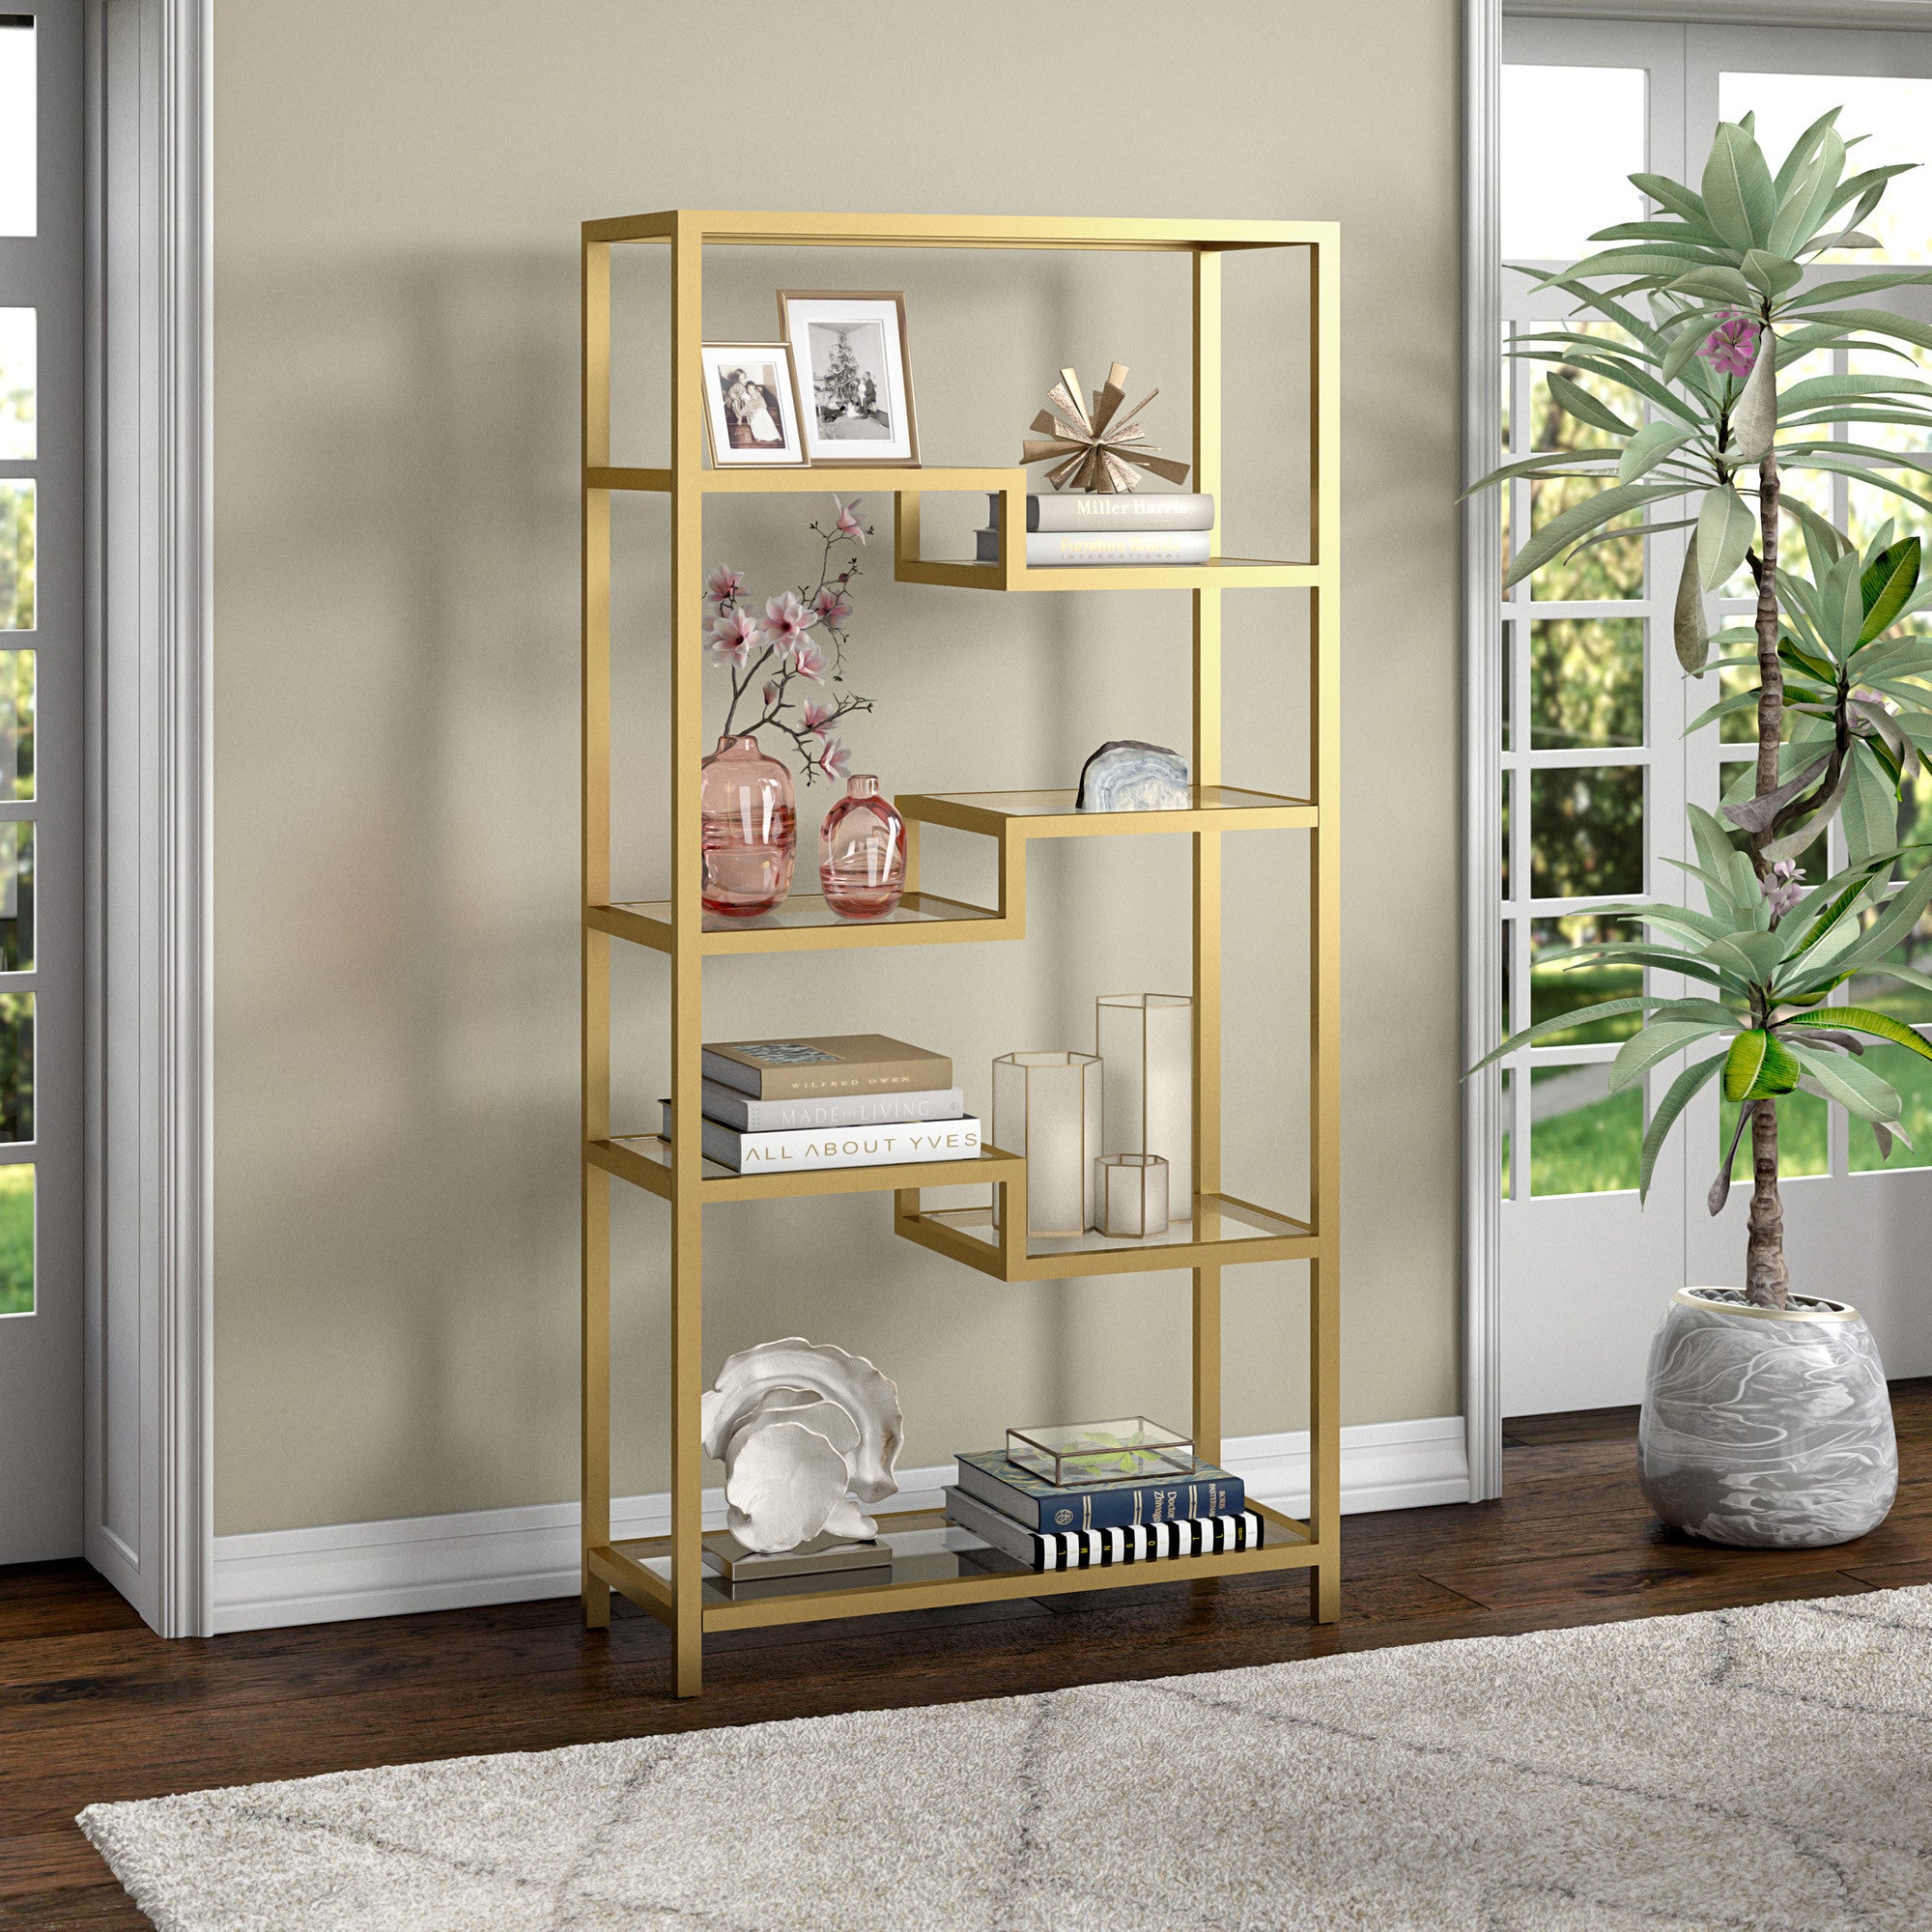 68" Gold Metal and Glass Seven Tier Etagere Bookcase